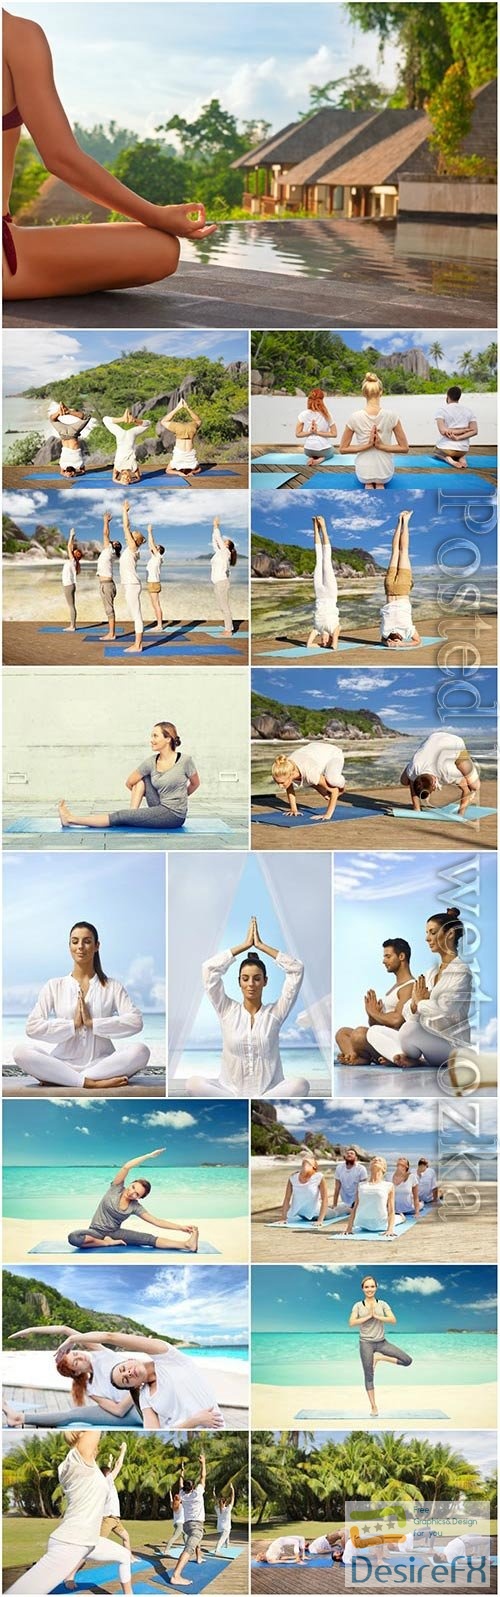 Yoga class in nature by the sea stock photo